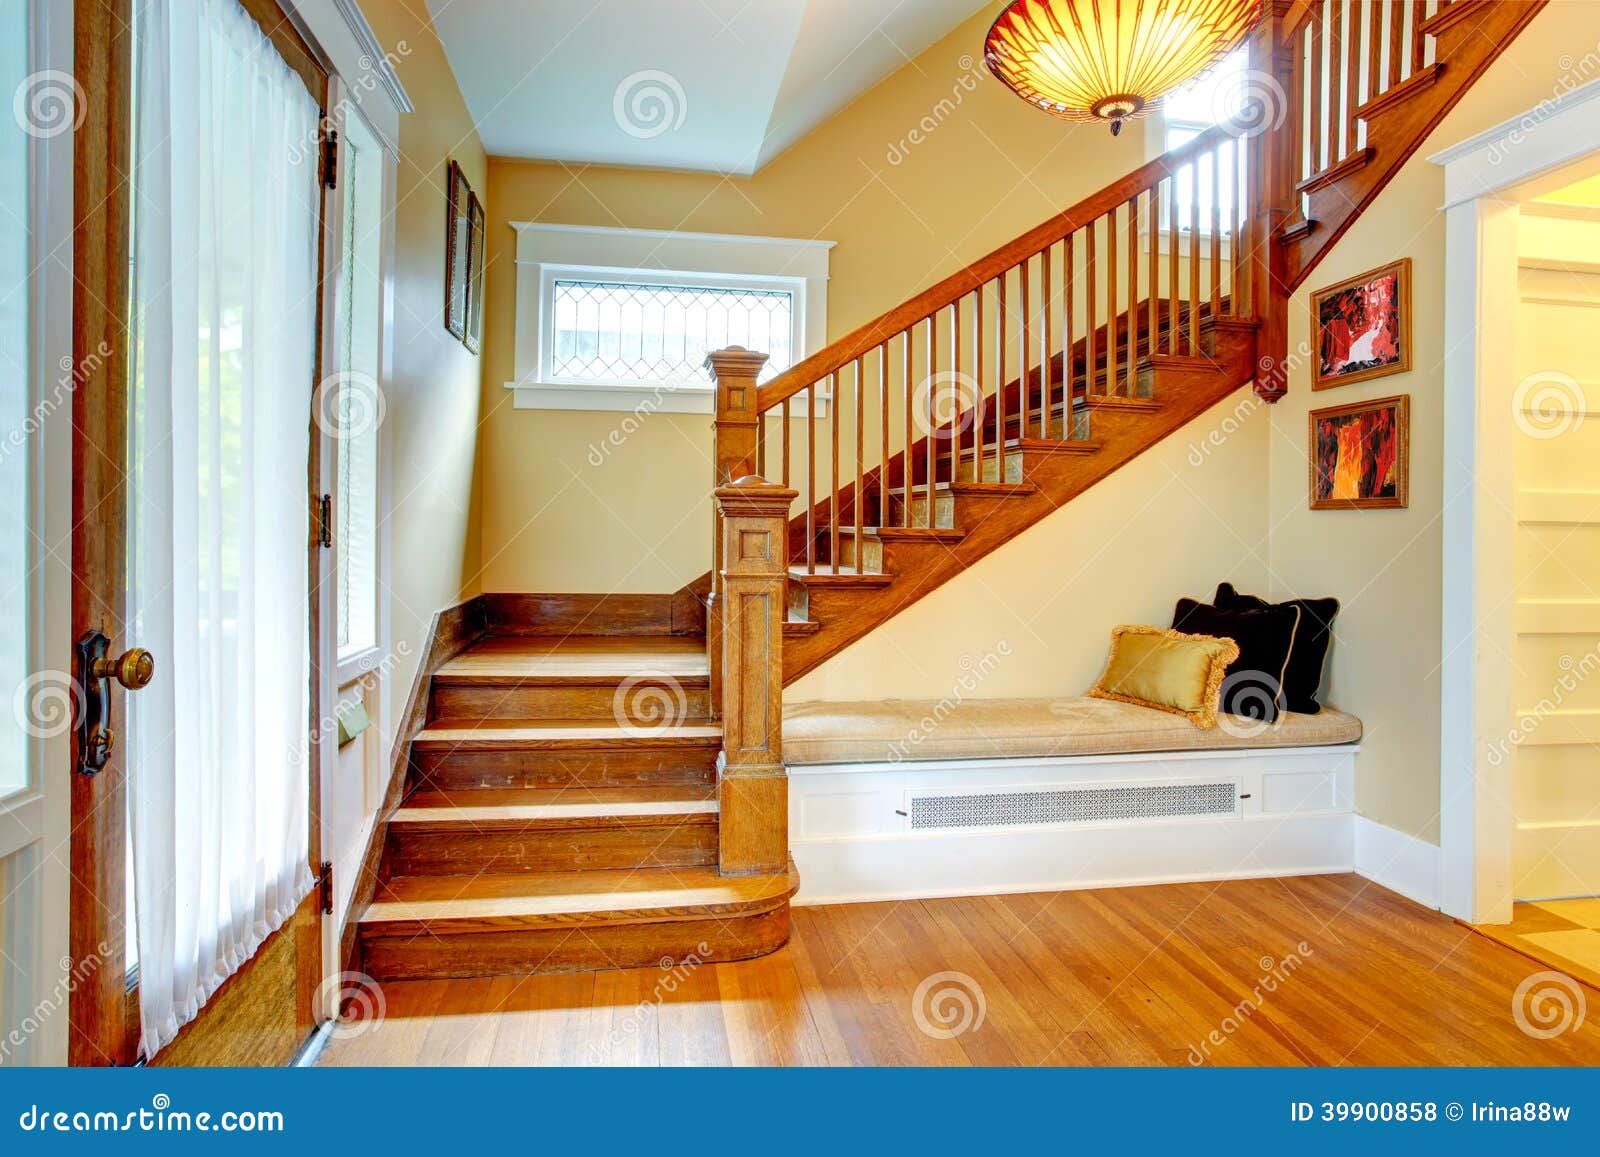 hallway interior. old staircase with bench